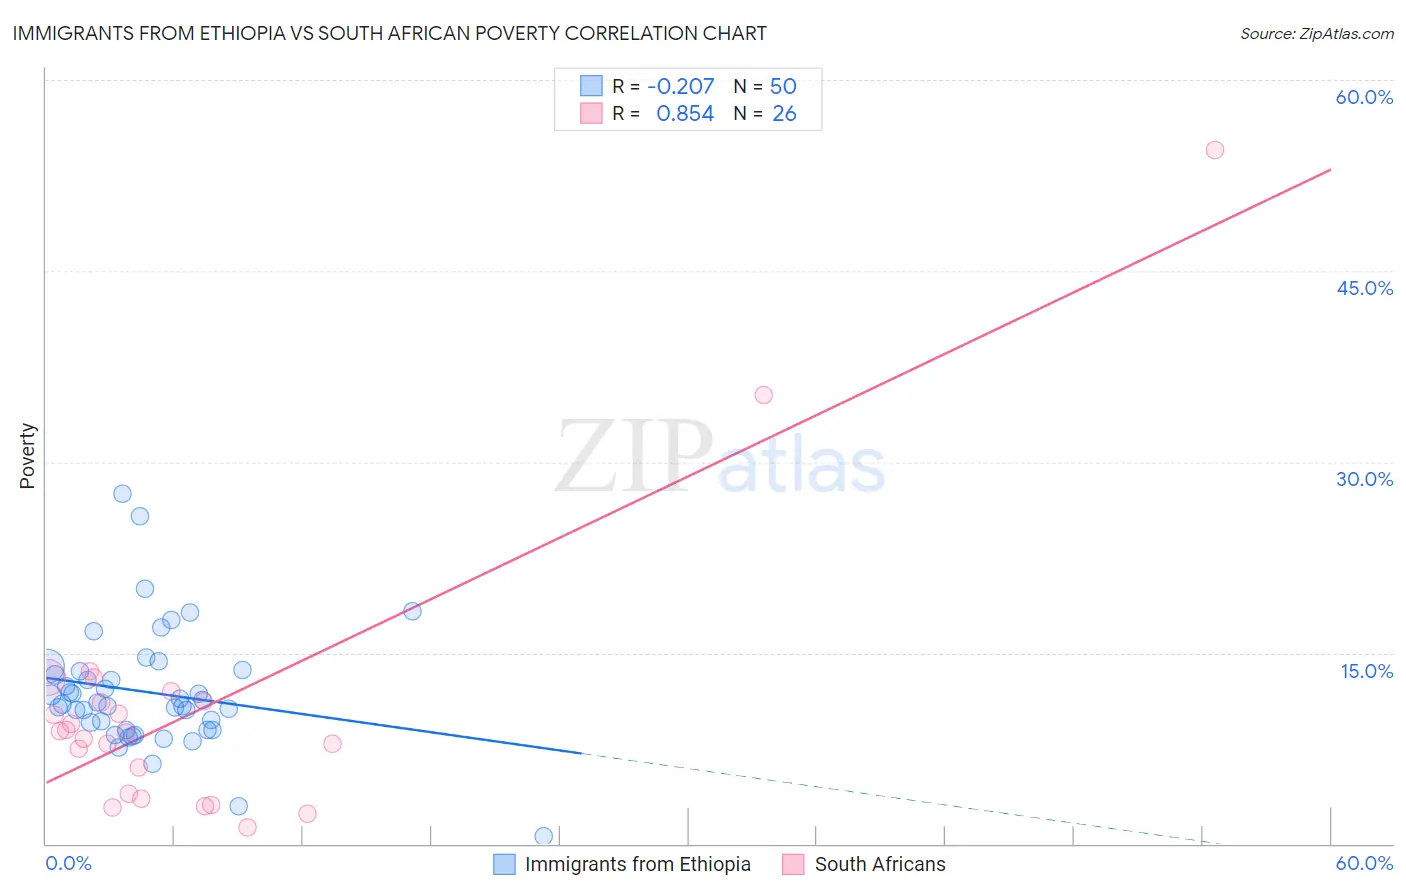 Immigrants from Ethiopia vs South African Poverty